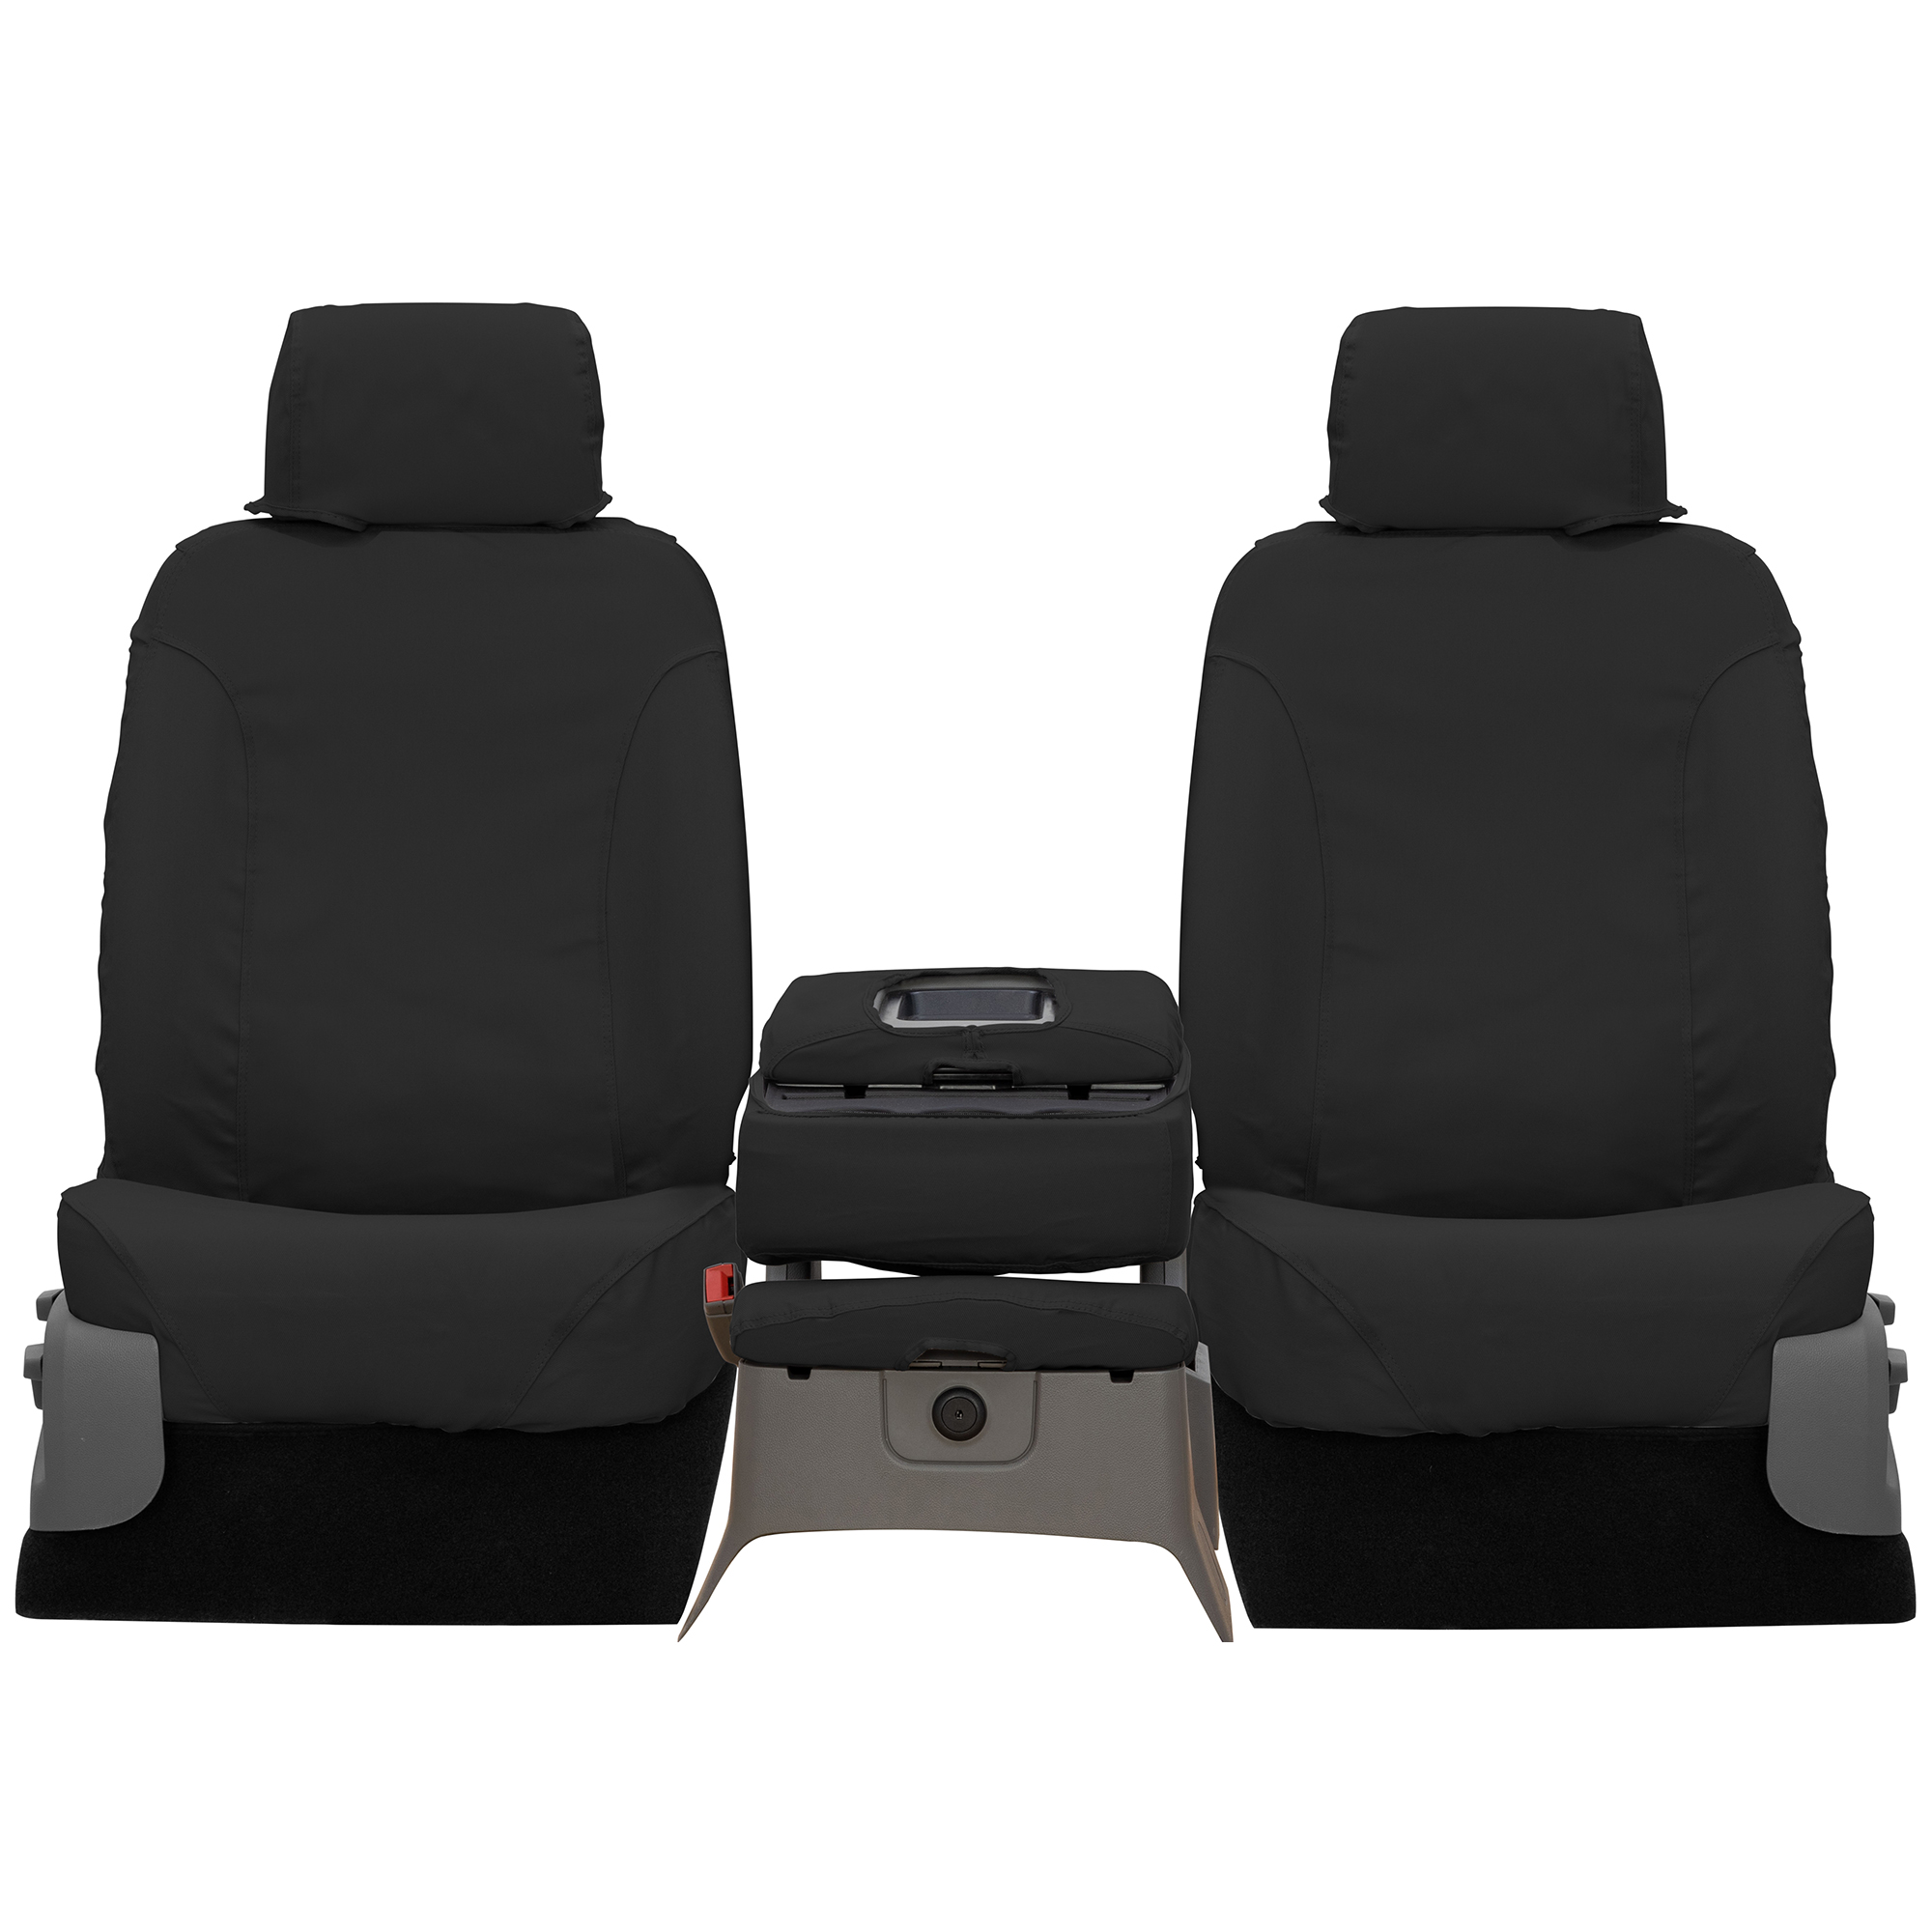 Covercraft Polycotton SeatSaver Custom Seat Covers for Ford F-150/F-250/F-350/F-450/F-550 Models - image 1 of 7